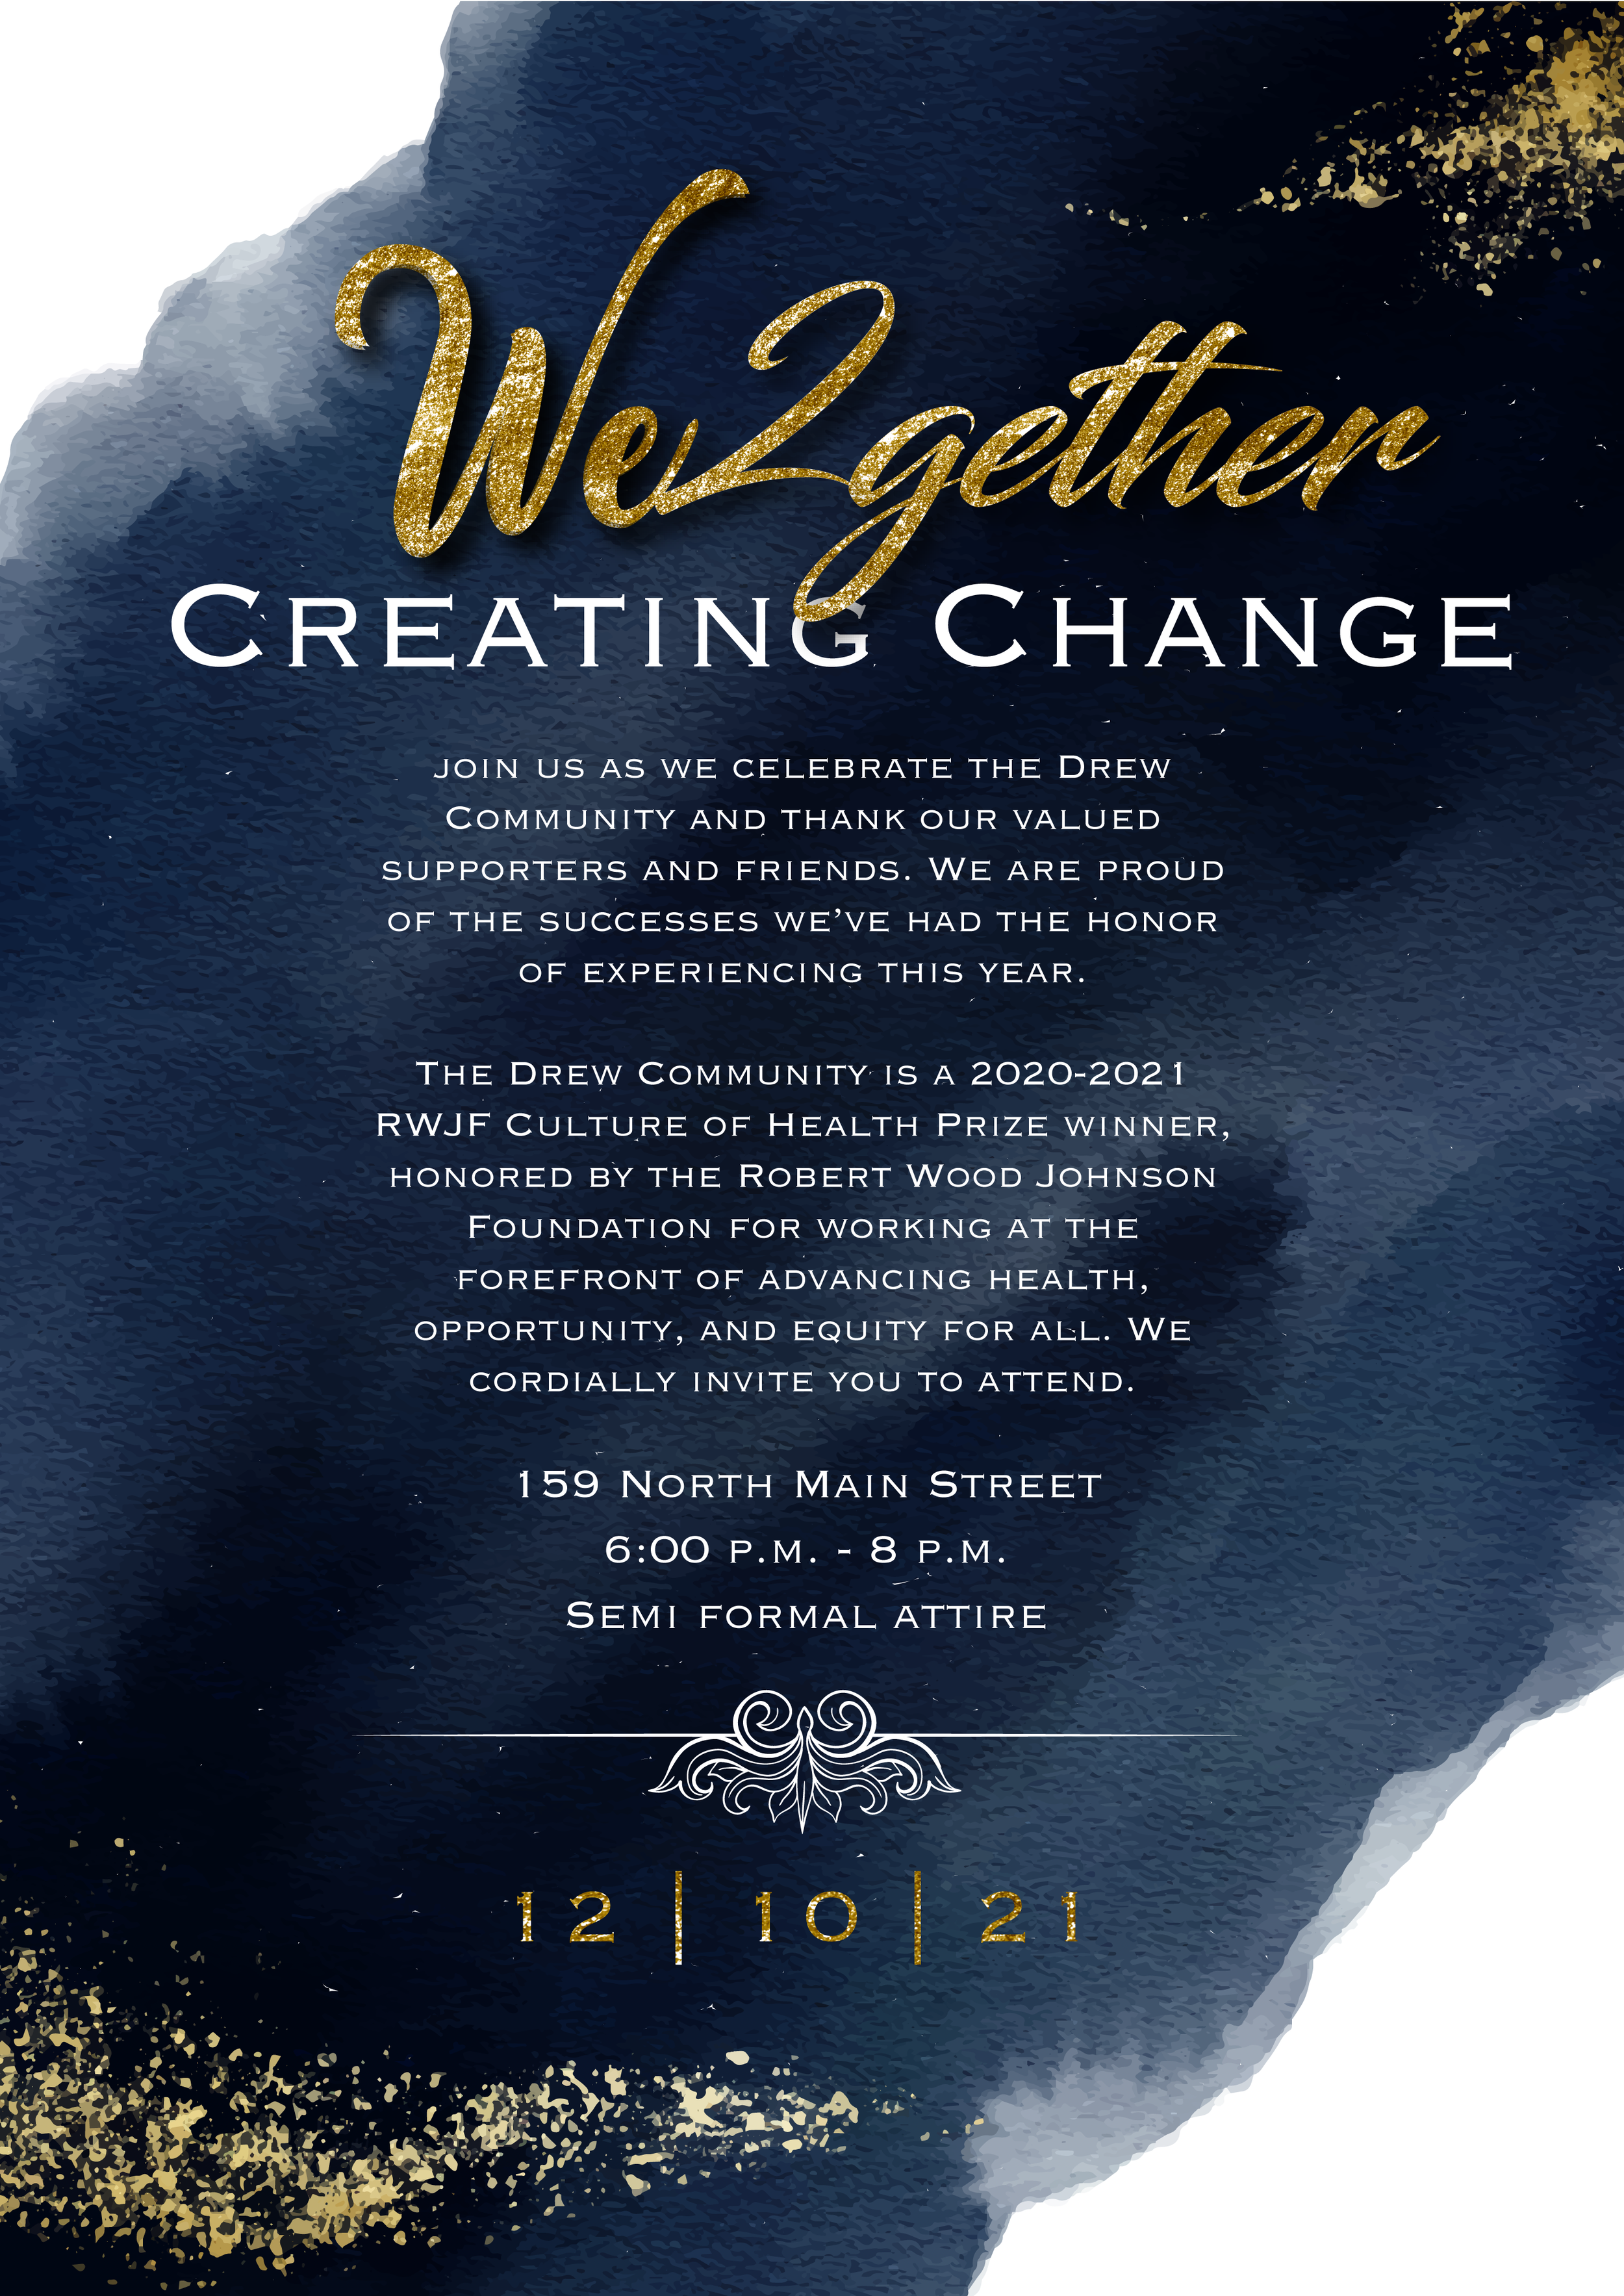 We2gether-Party-Invite-Draft-2.png